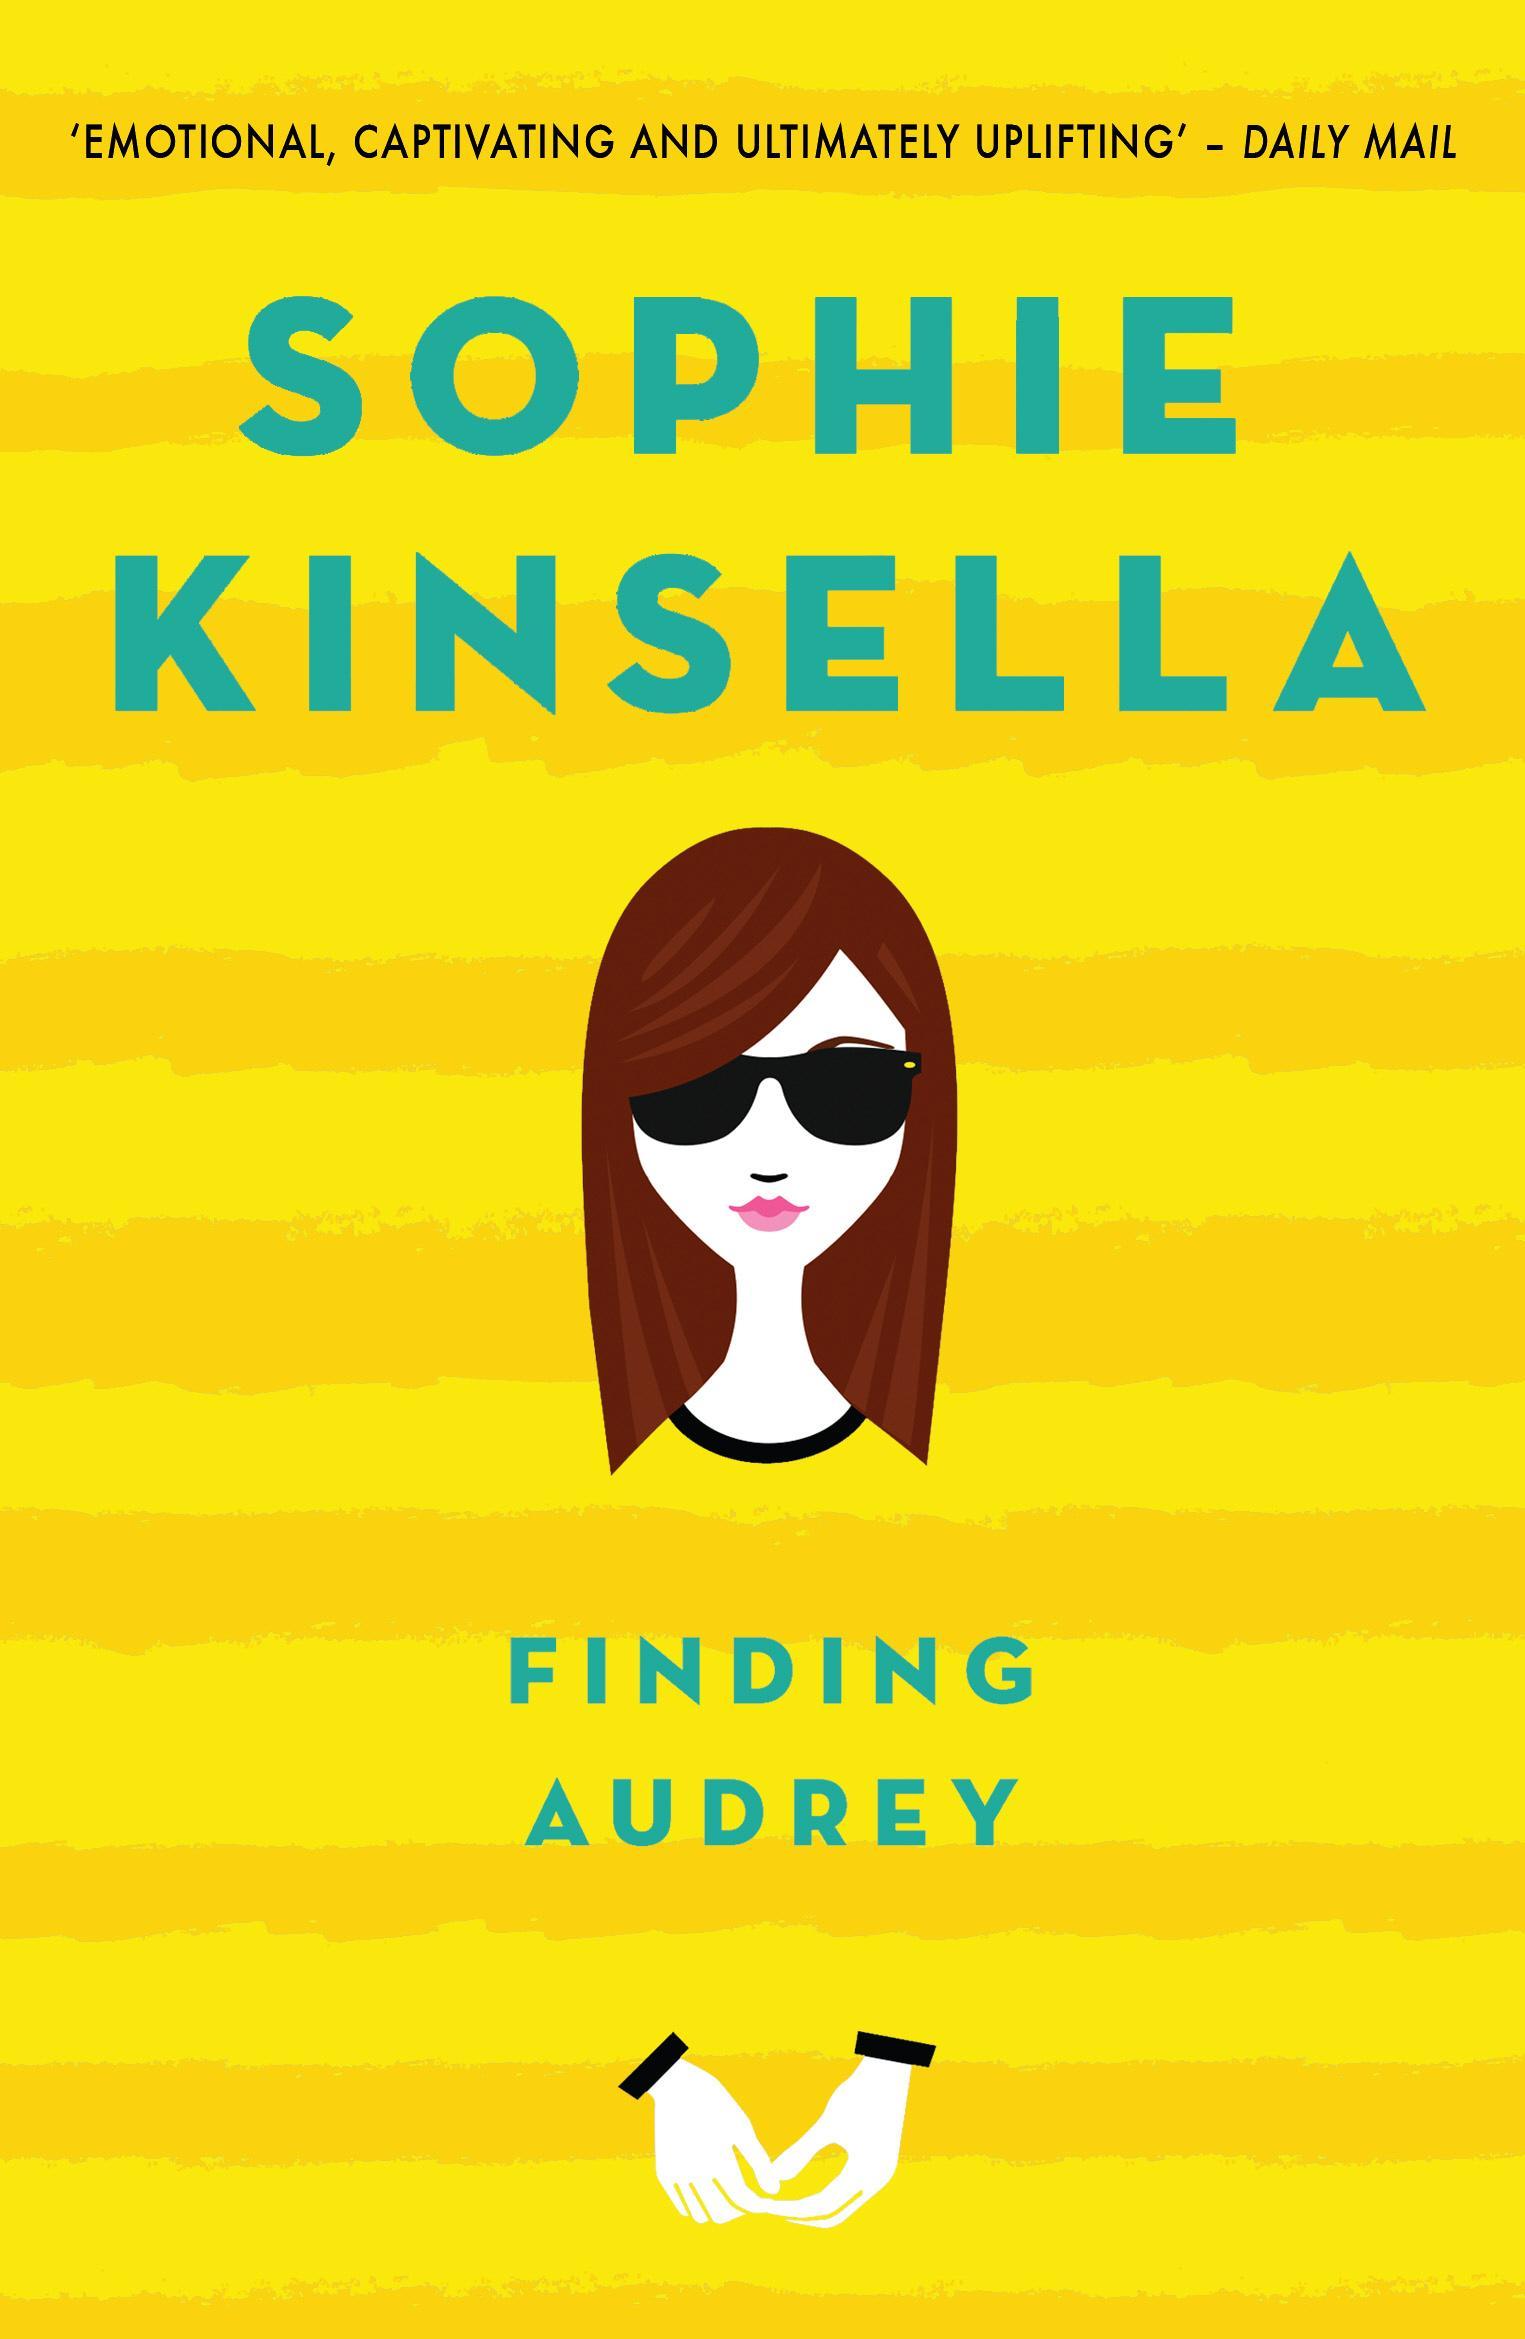 Finding Audrey